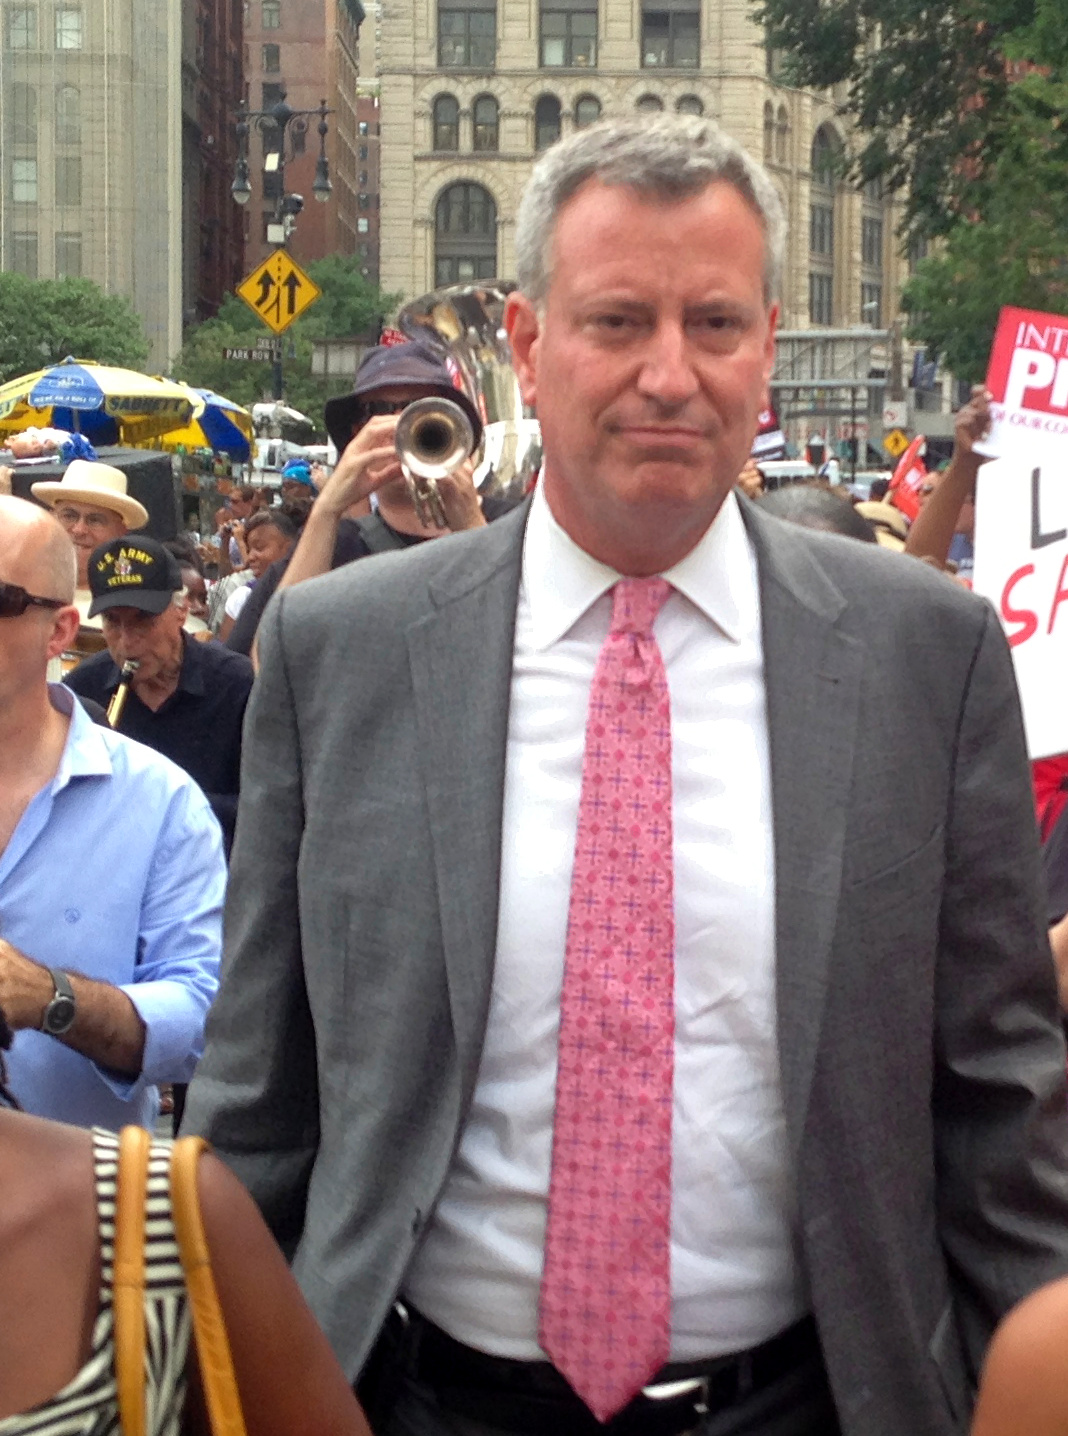 Under Mayor de Blasio, NYC Is Spiraling Out Of Control